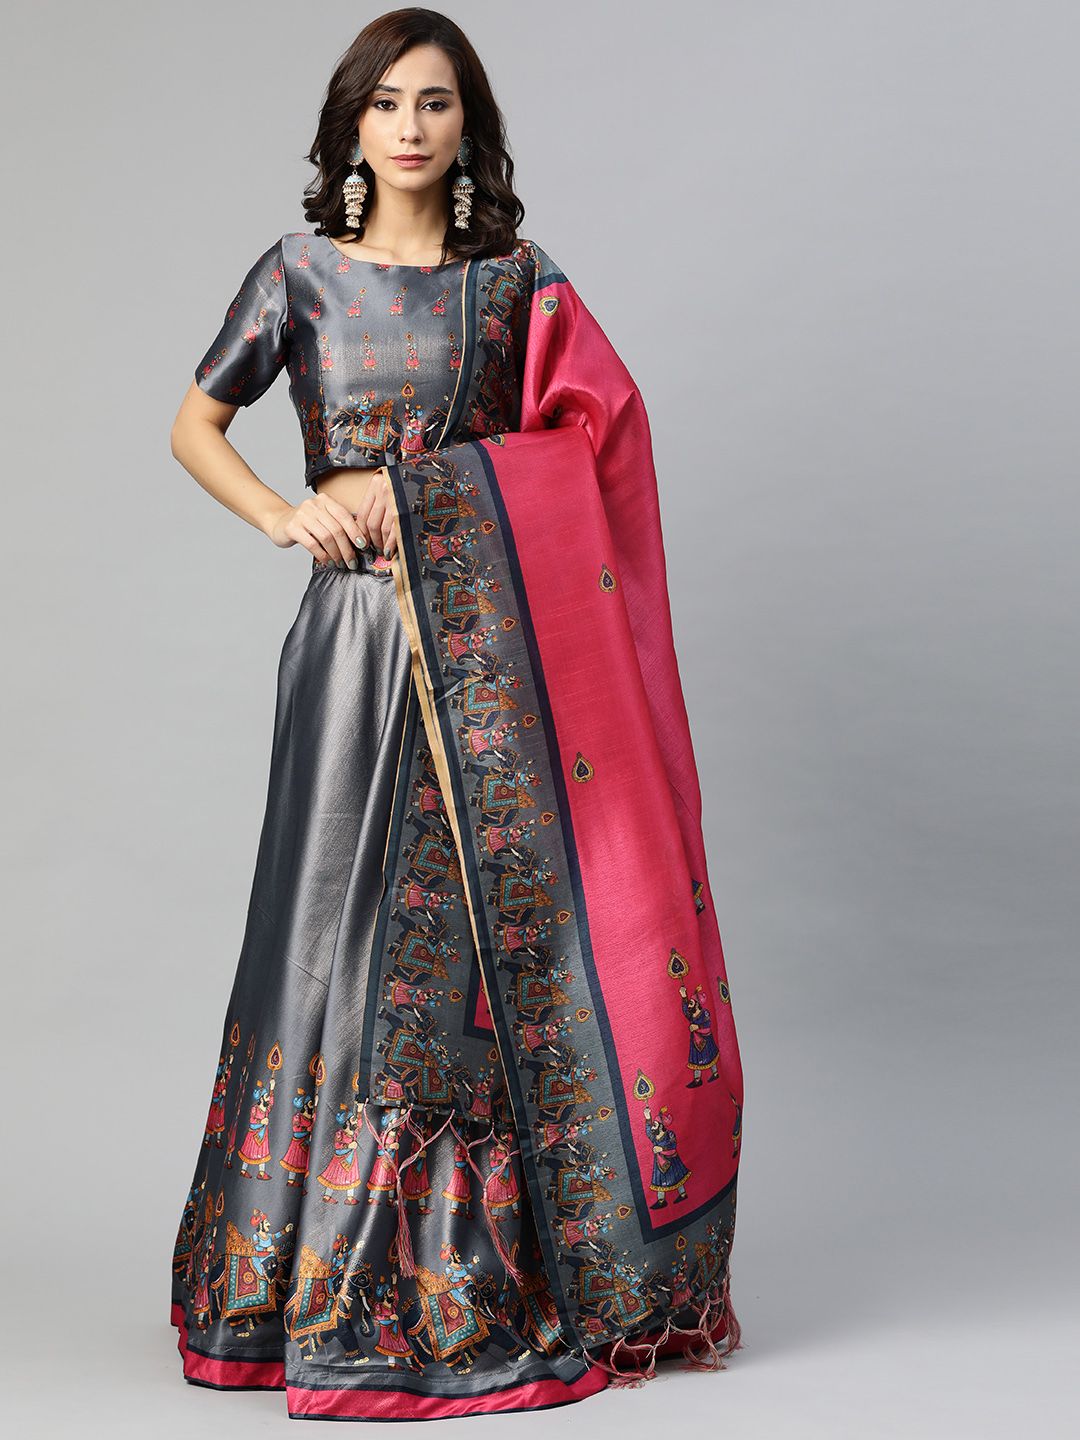 SHUBHVASTRA Charcoal & Pink Printed Semi-Stitched Lehenga & Unstitched Blouse With Dupatta Price in India